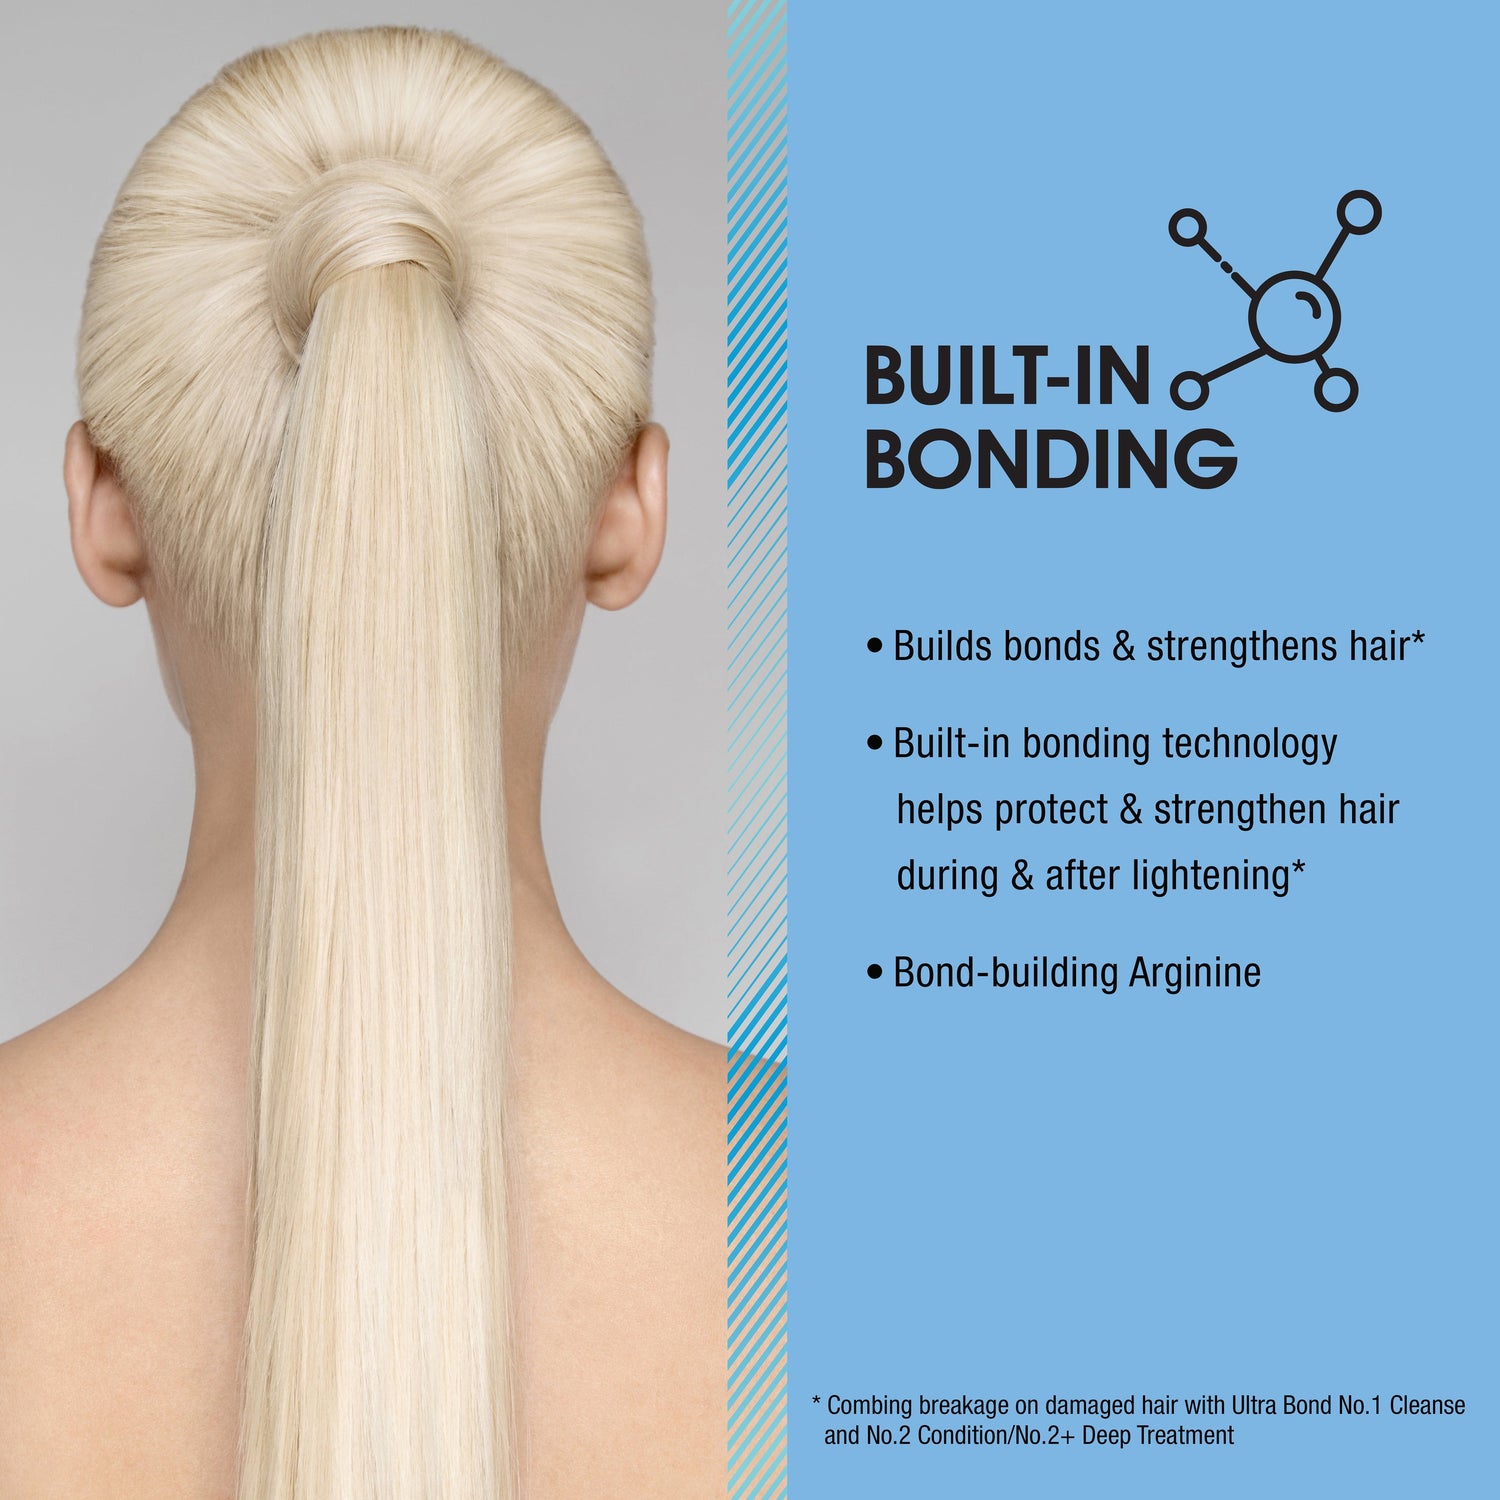 AGEbeautiful® Ultra Bond™ No. 1 Blonde Care Purple Conditioner+ has built in bonding to help protect and strengthen hair during & after lightening